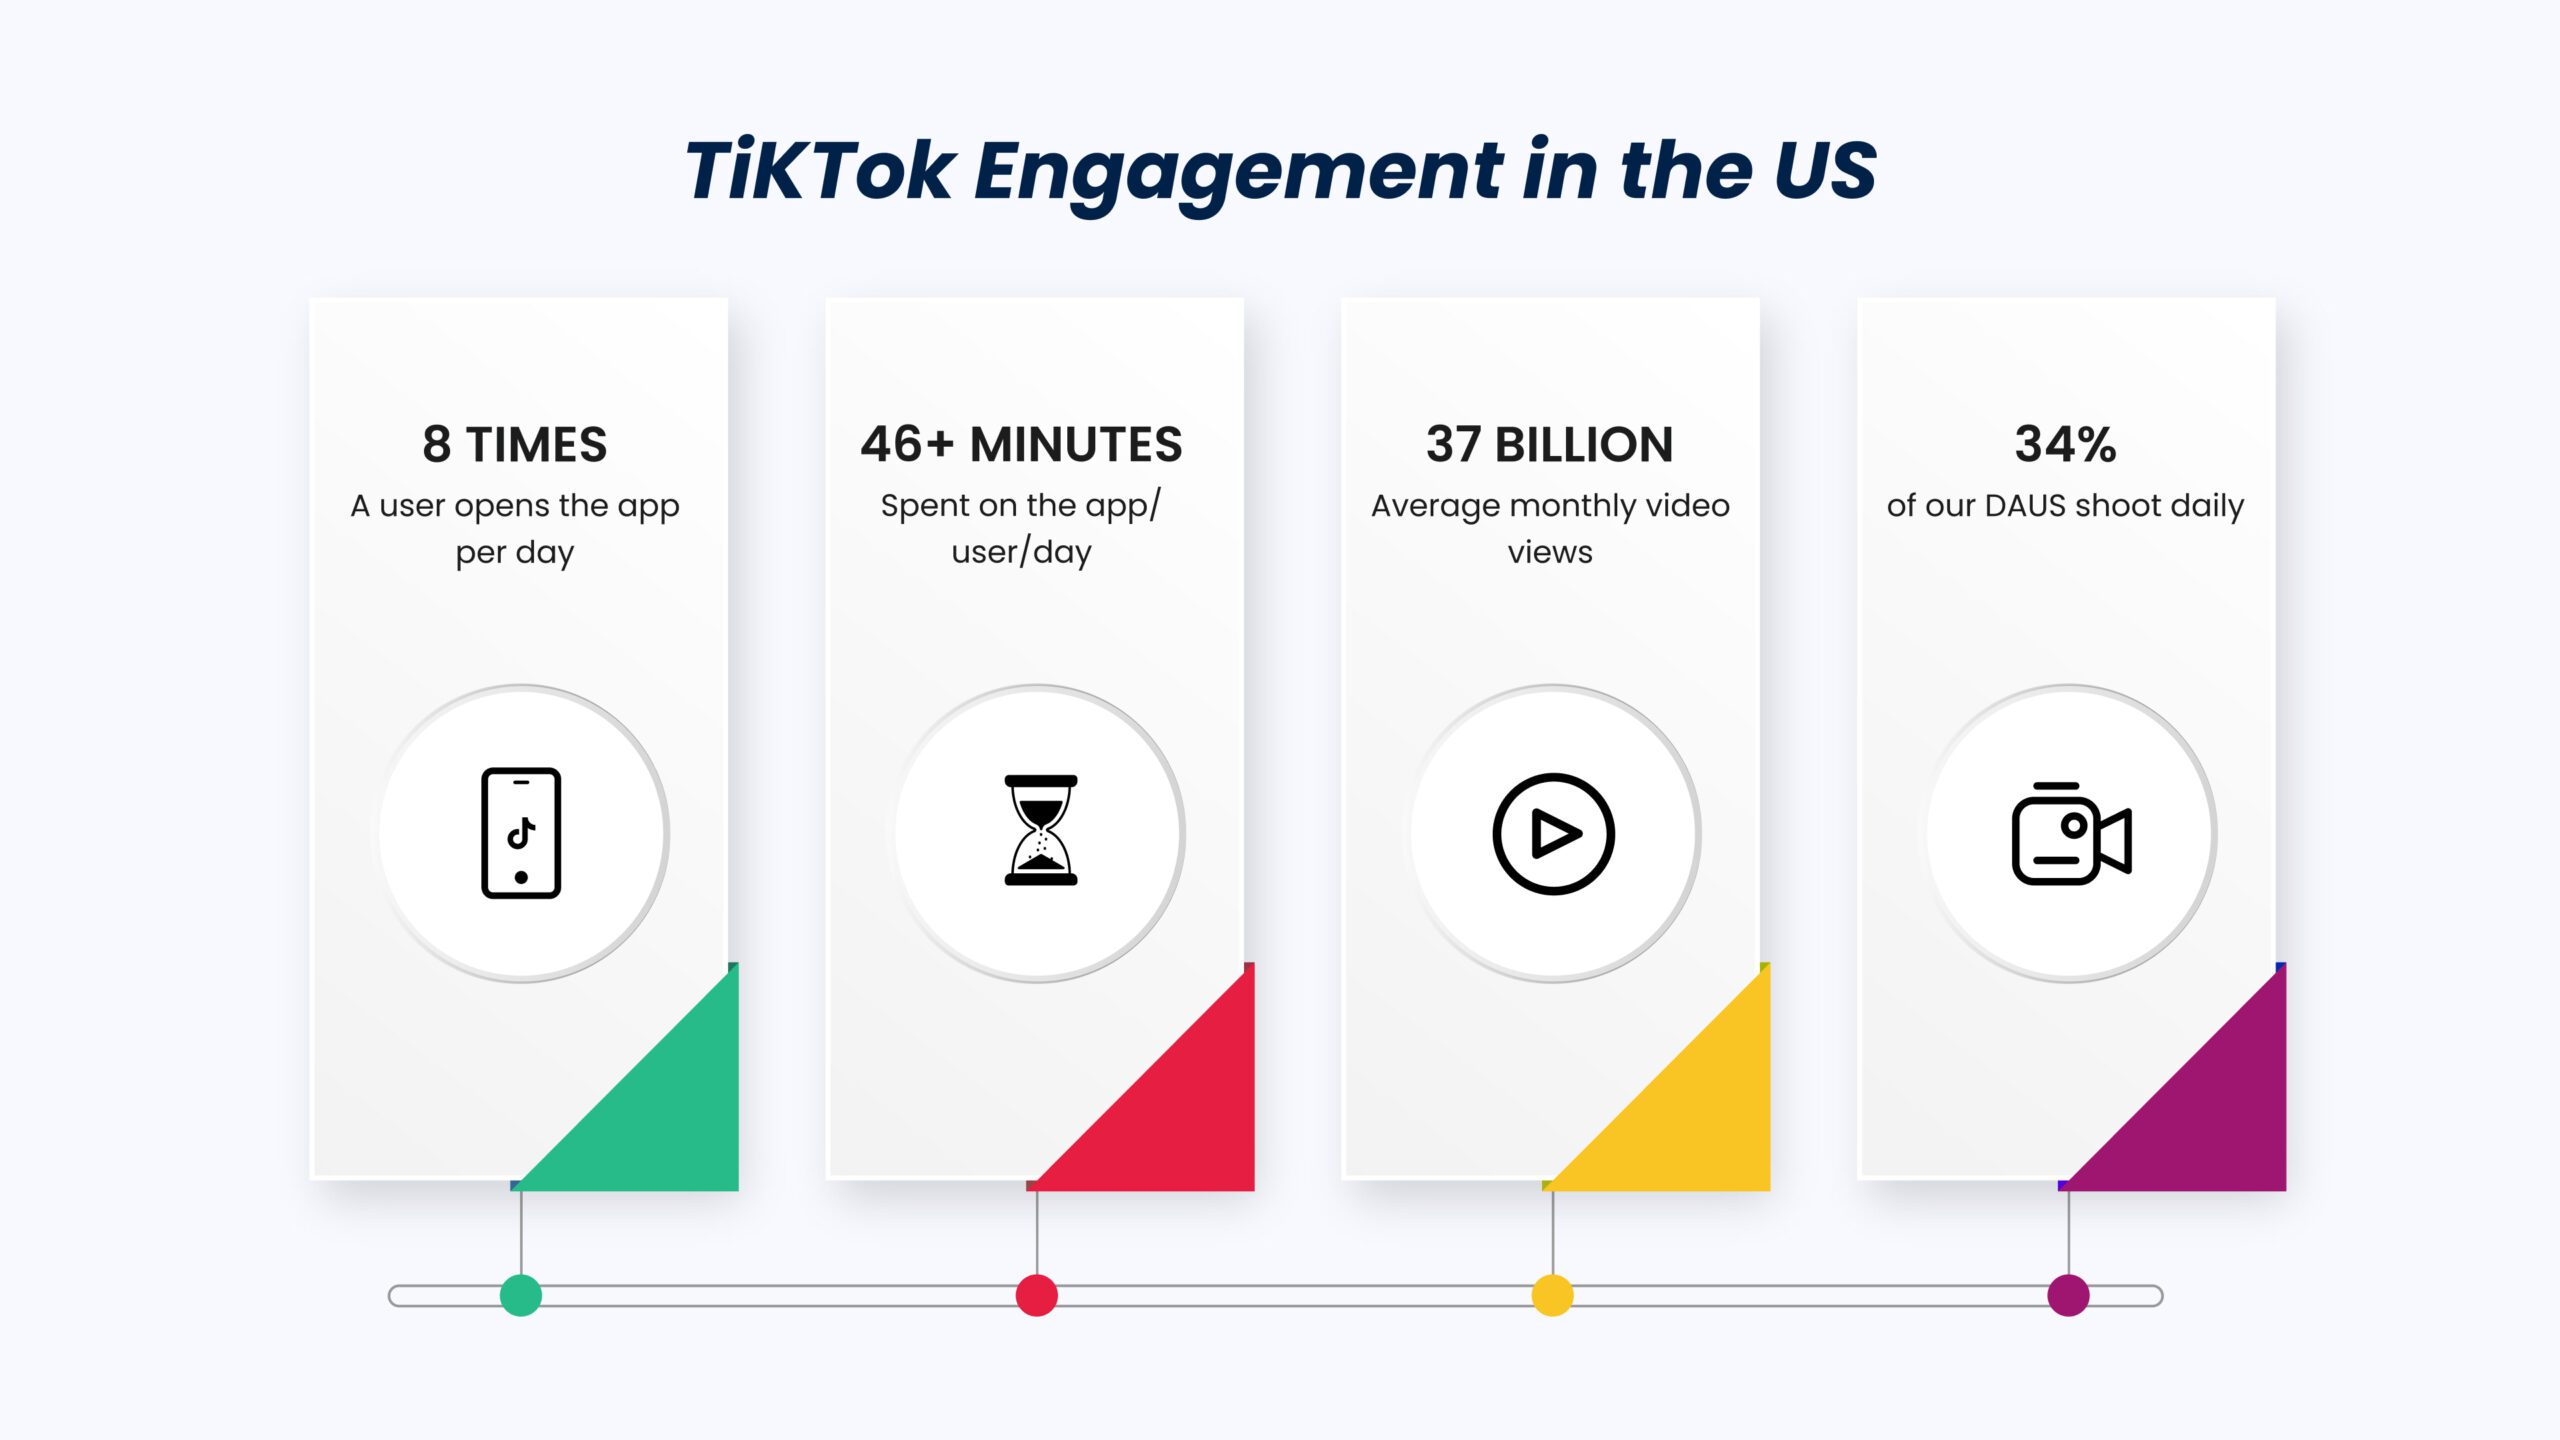 Tik-Tok Engagement in the US